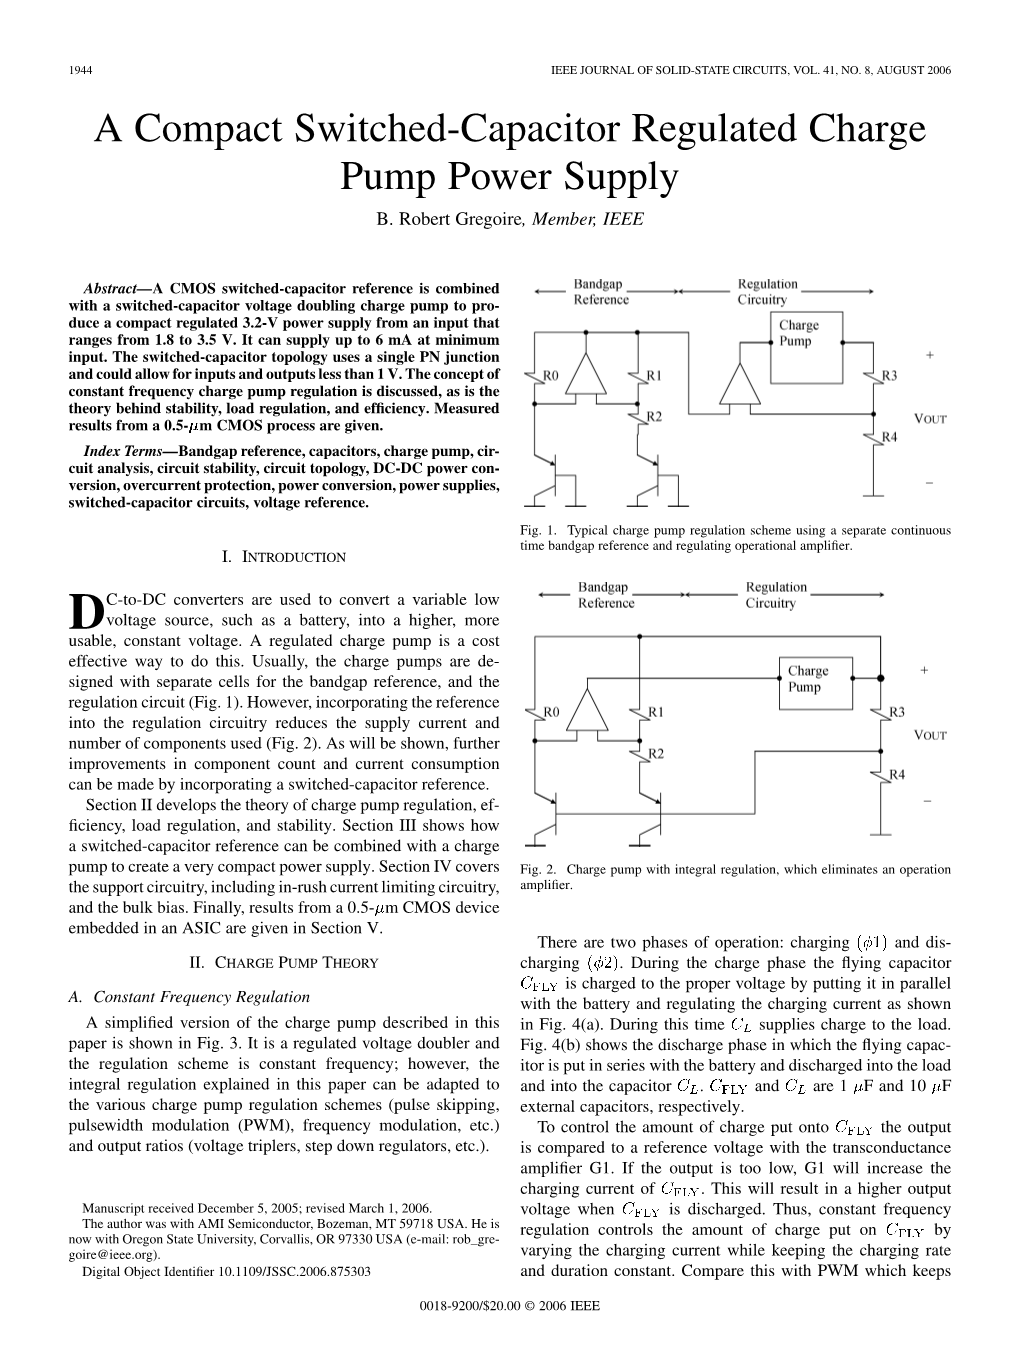 A Compact Switched-Capacitor Regulated Charge Pump Power Supply B